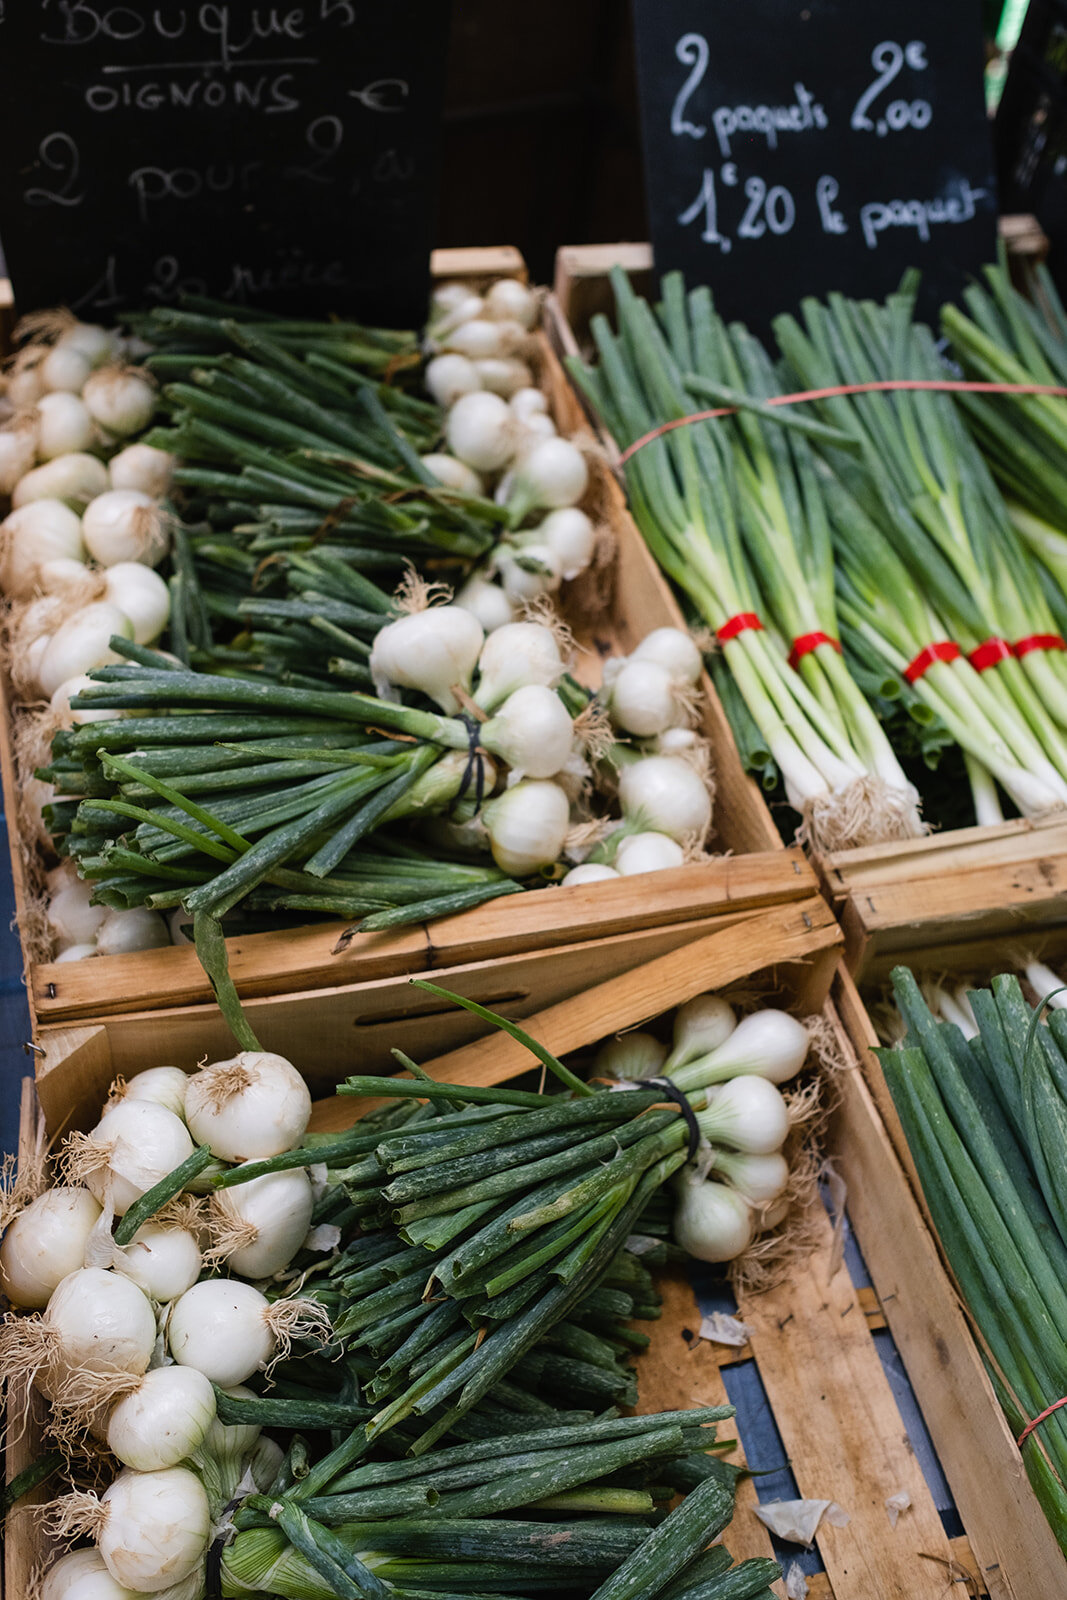 Garlic and onions on market day in France